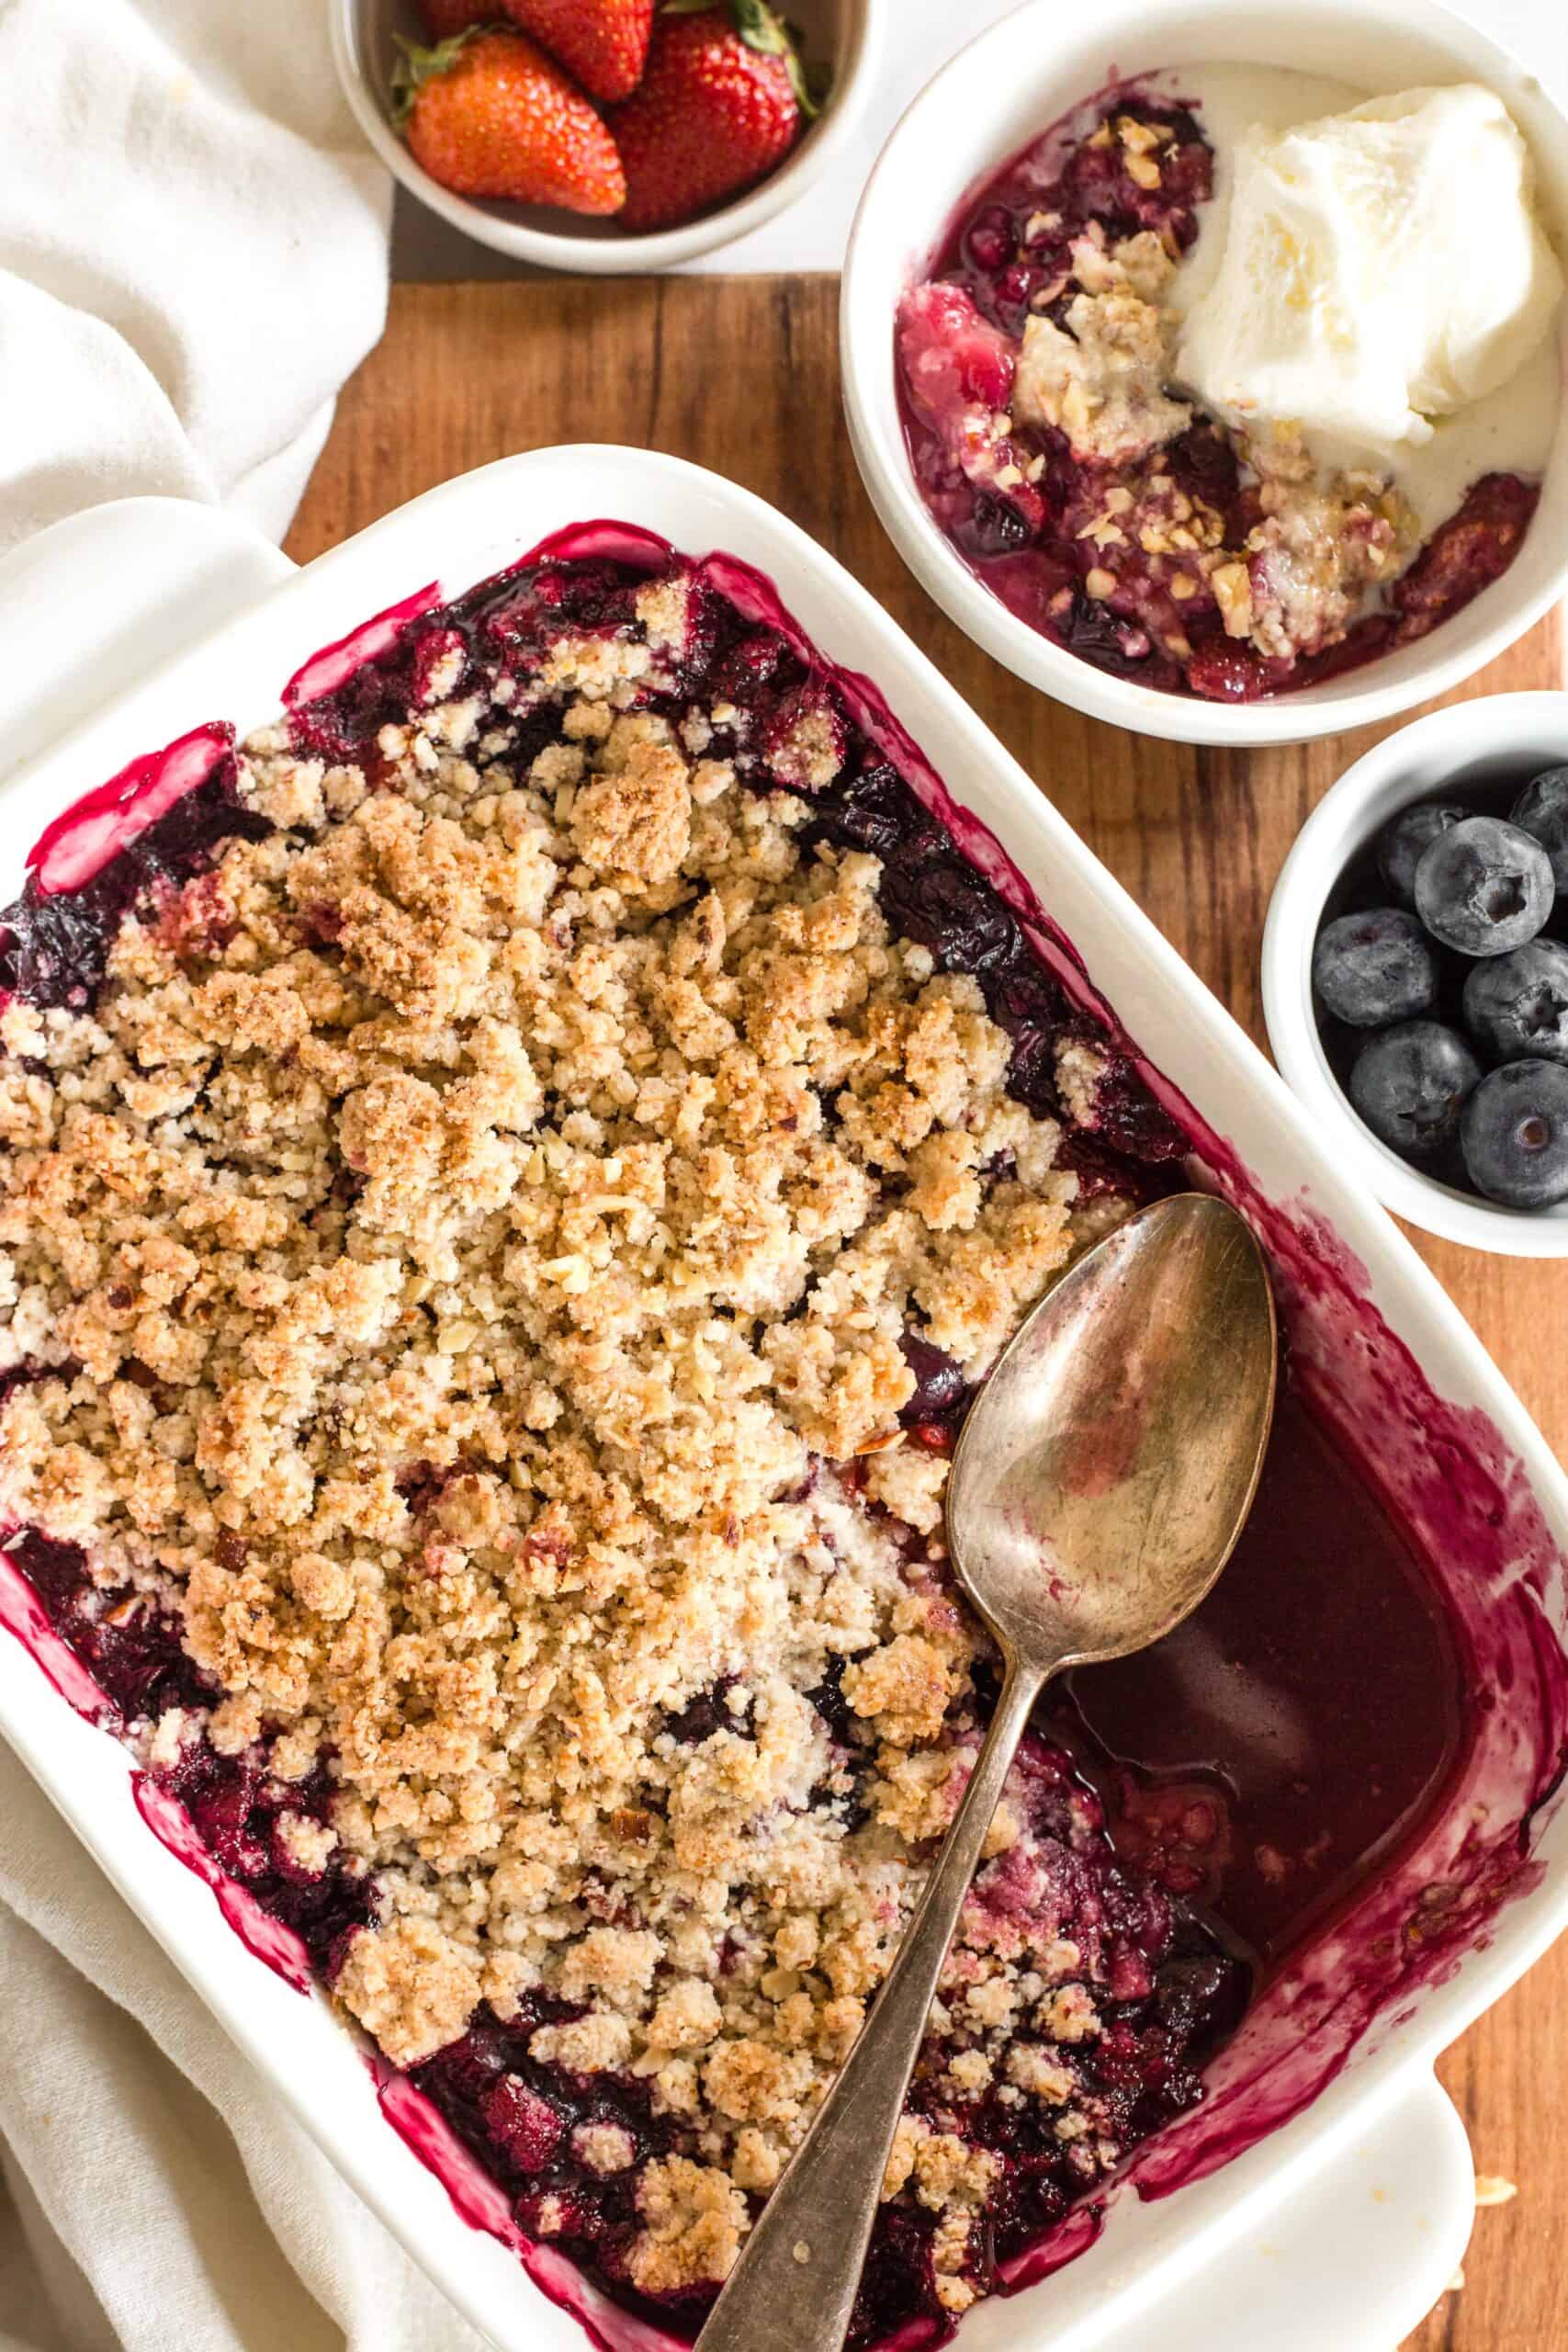 Half eaten gluten free berry crumble on wooden board with spoon.